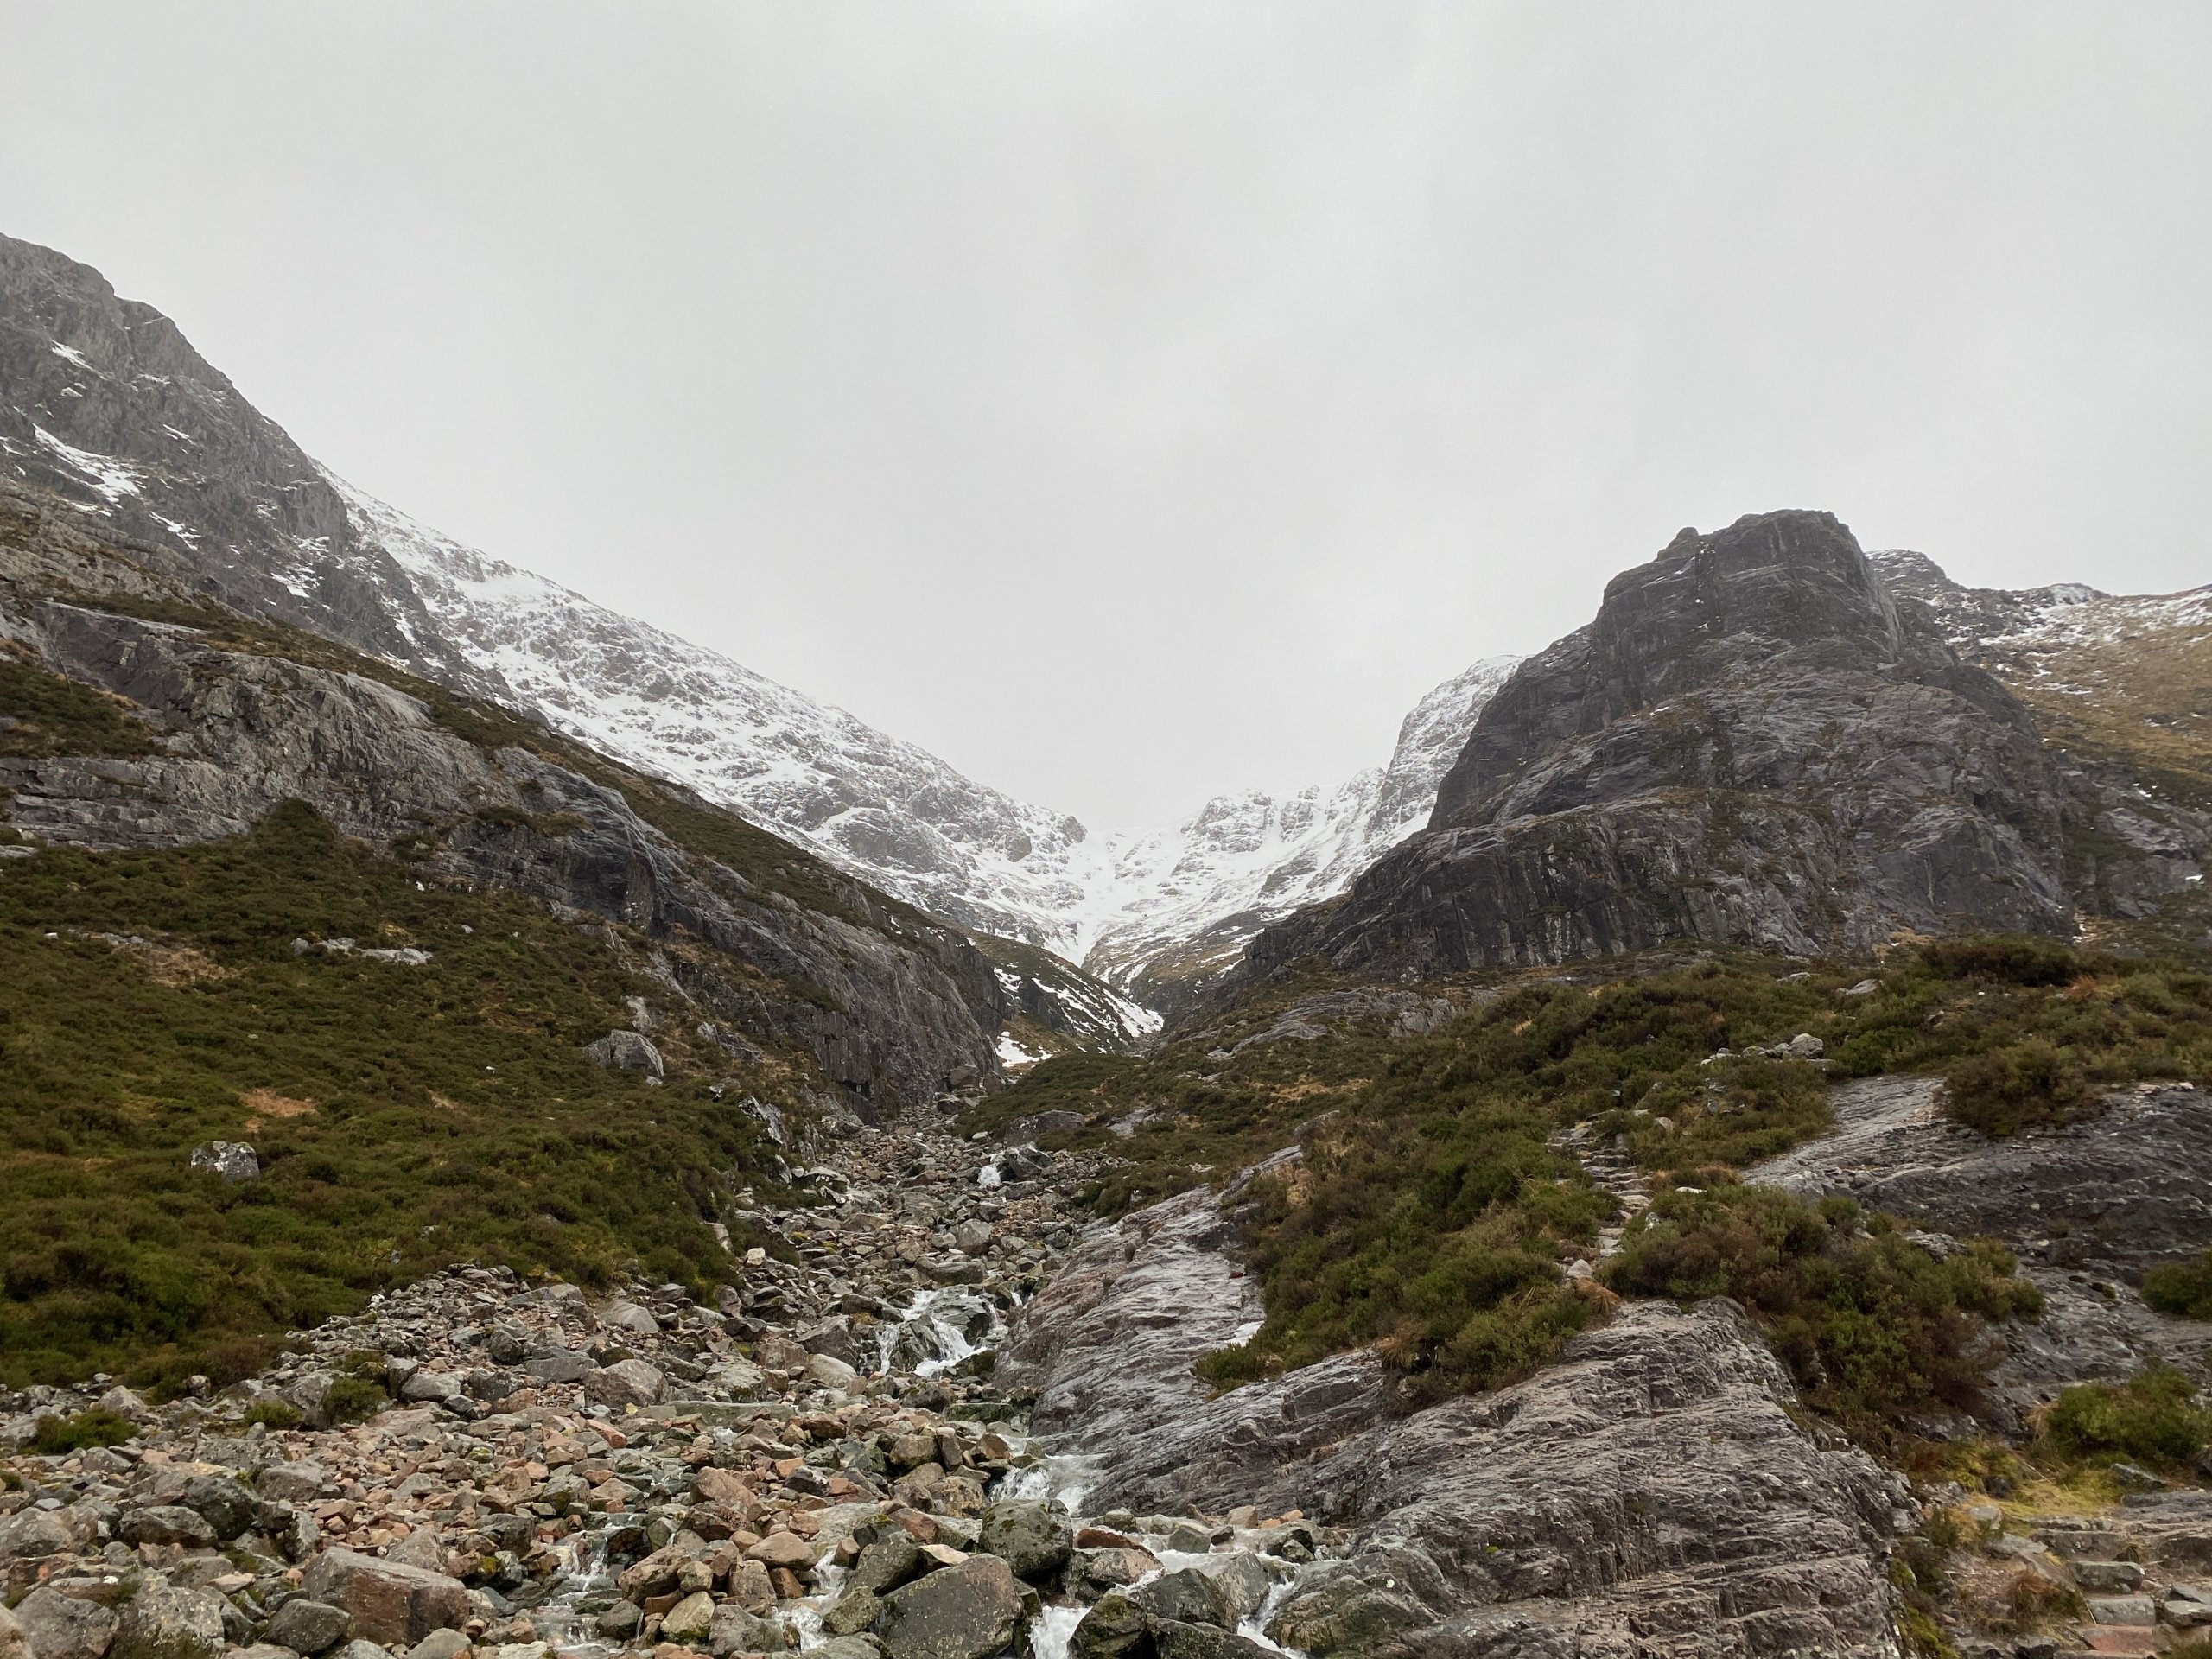 Looking up Coire na Tulaich, as the rain was coming in at lunchtime.